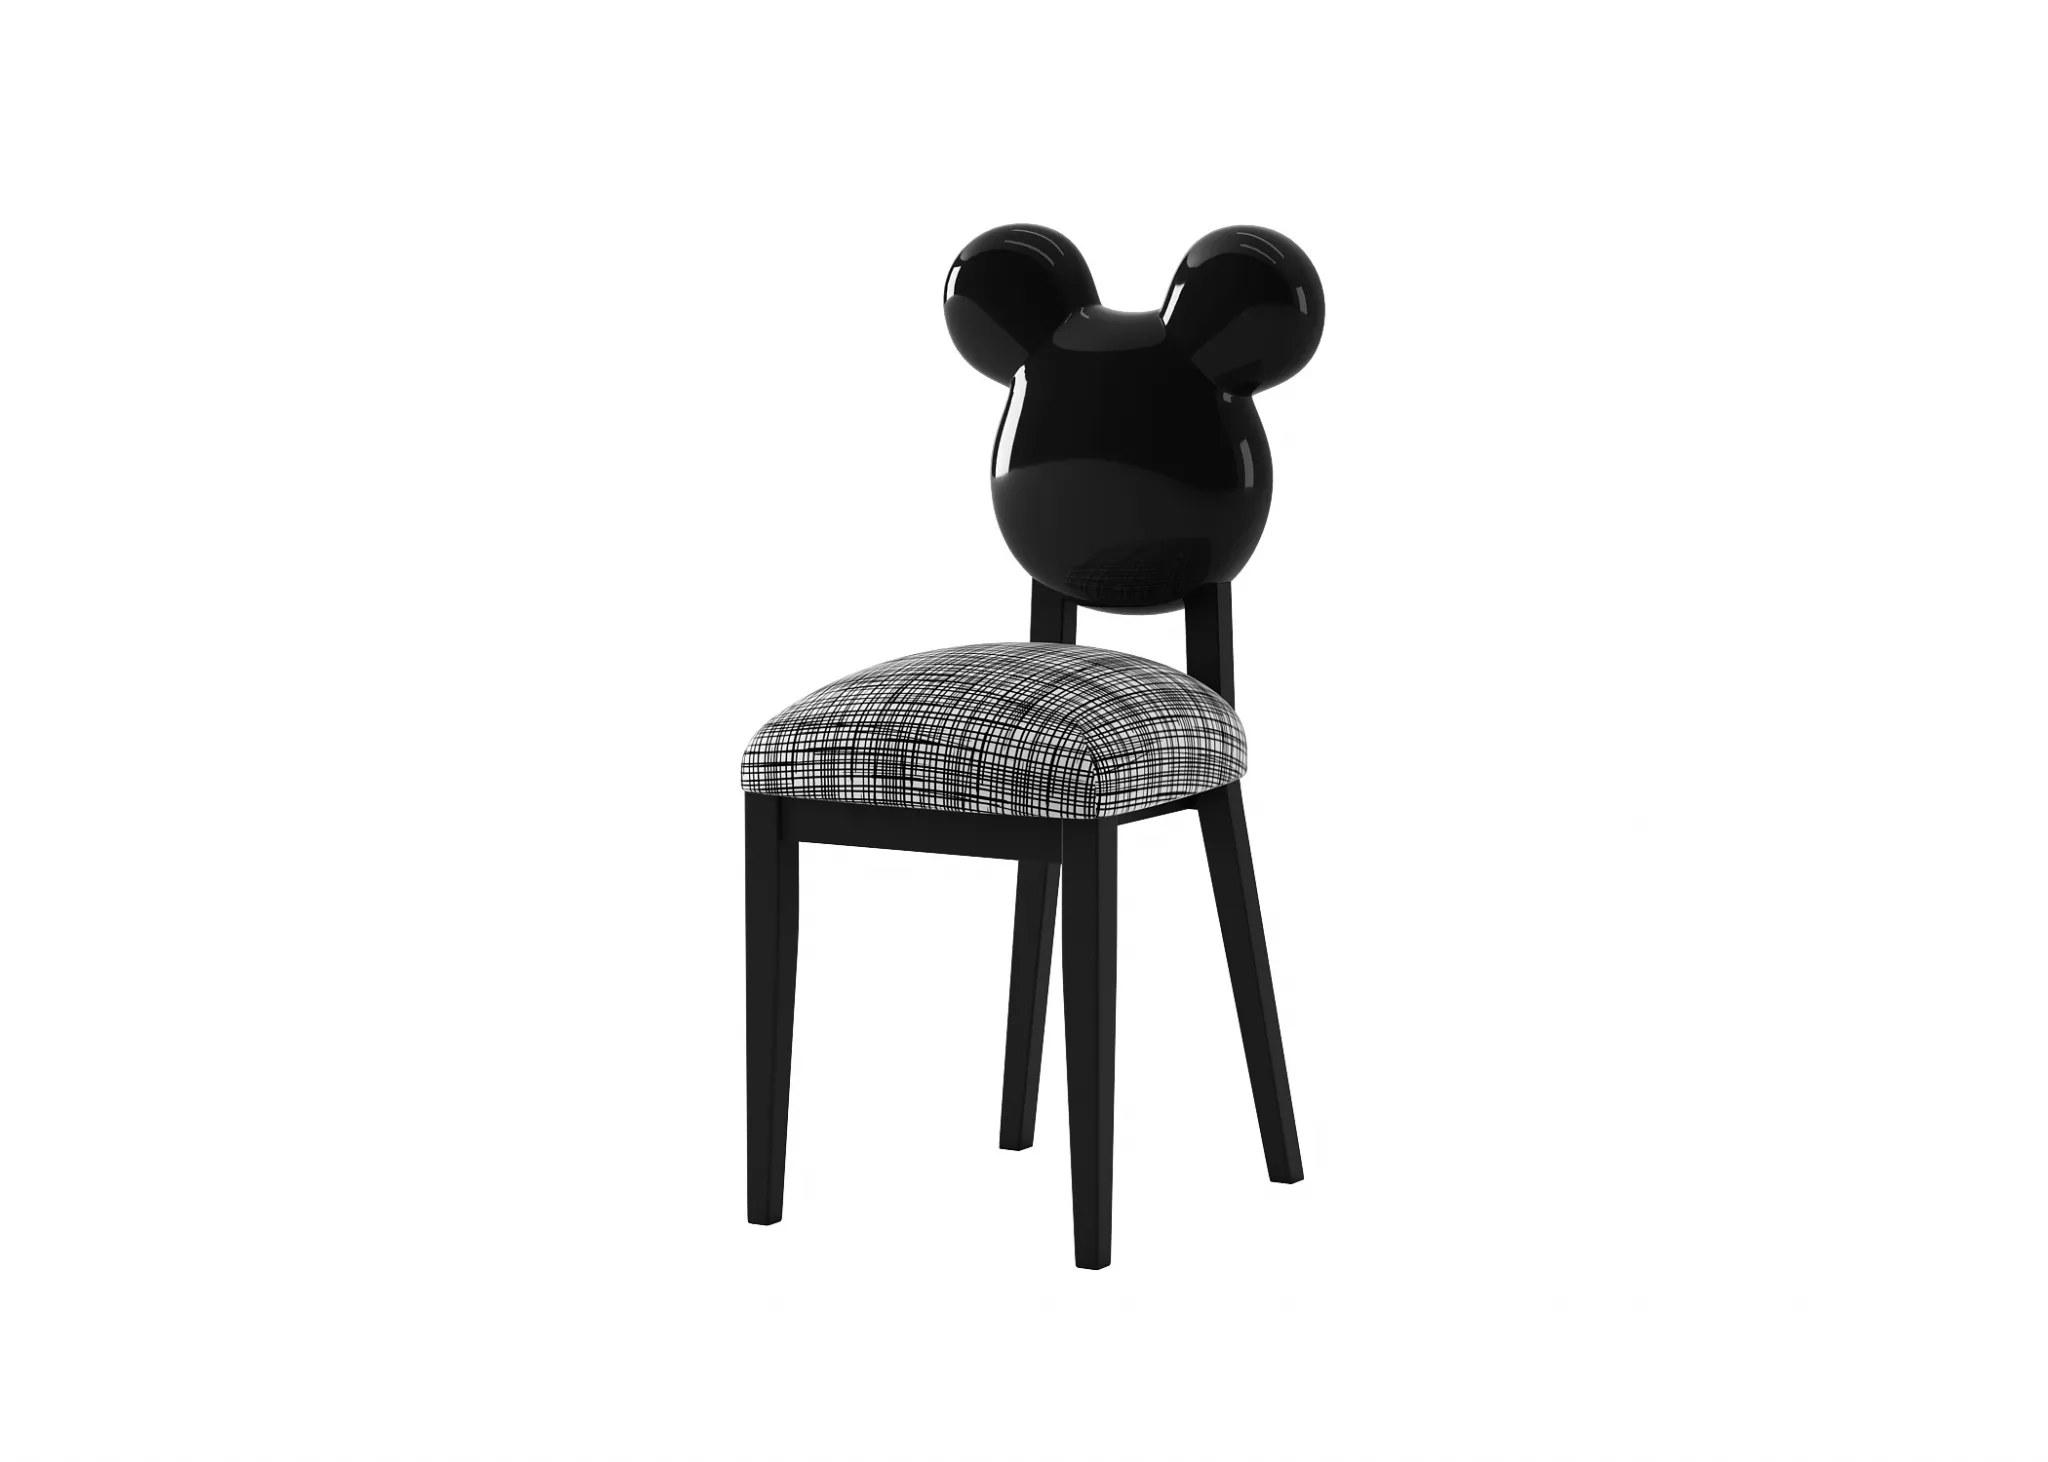 FURNITURE 3D MODELS – CHAIRS – 0399